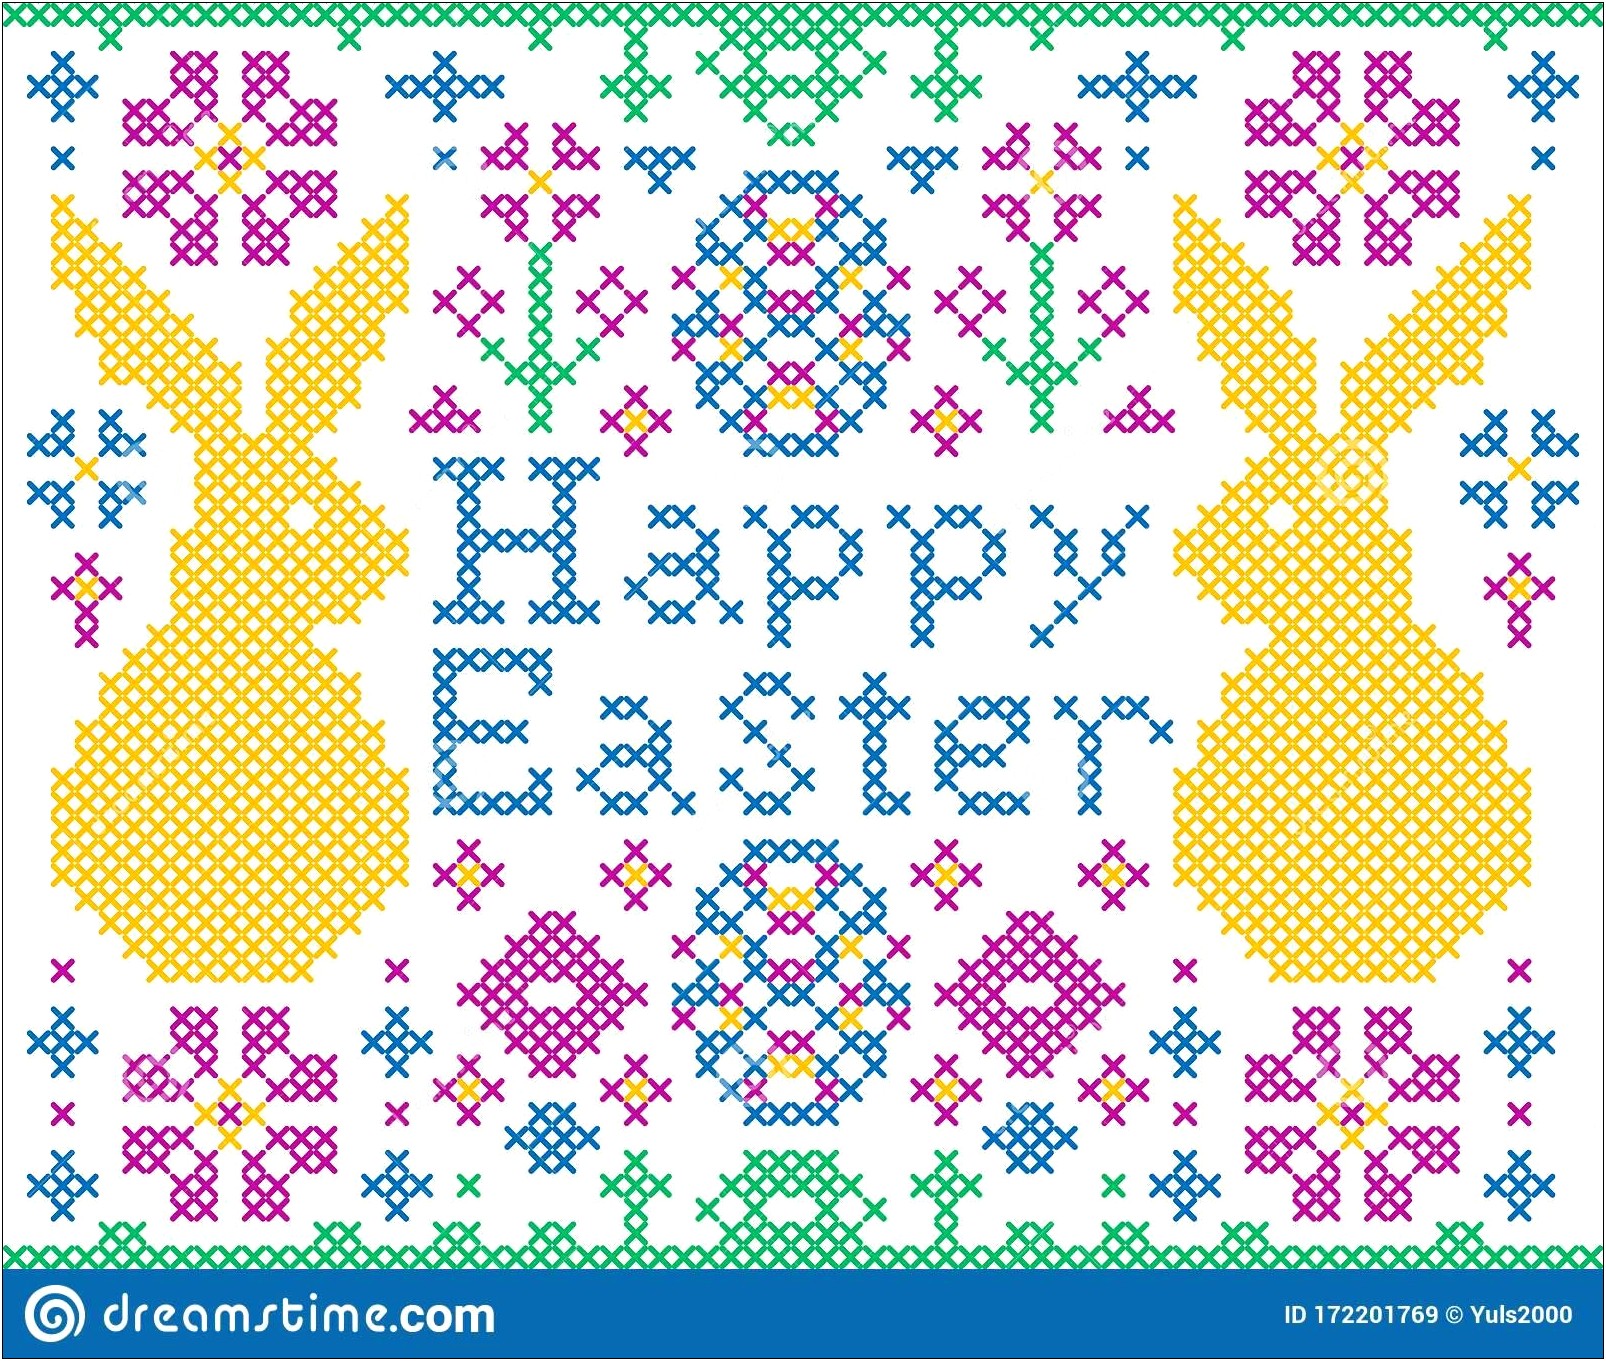 Free Cross Stitch Templates For Easter Eggs